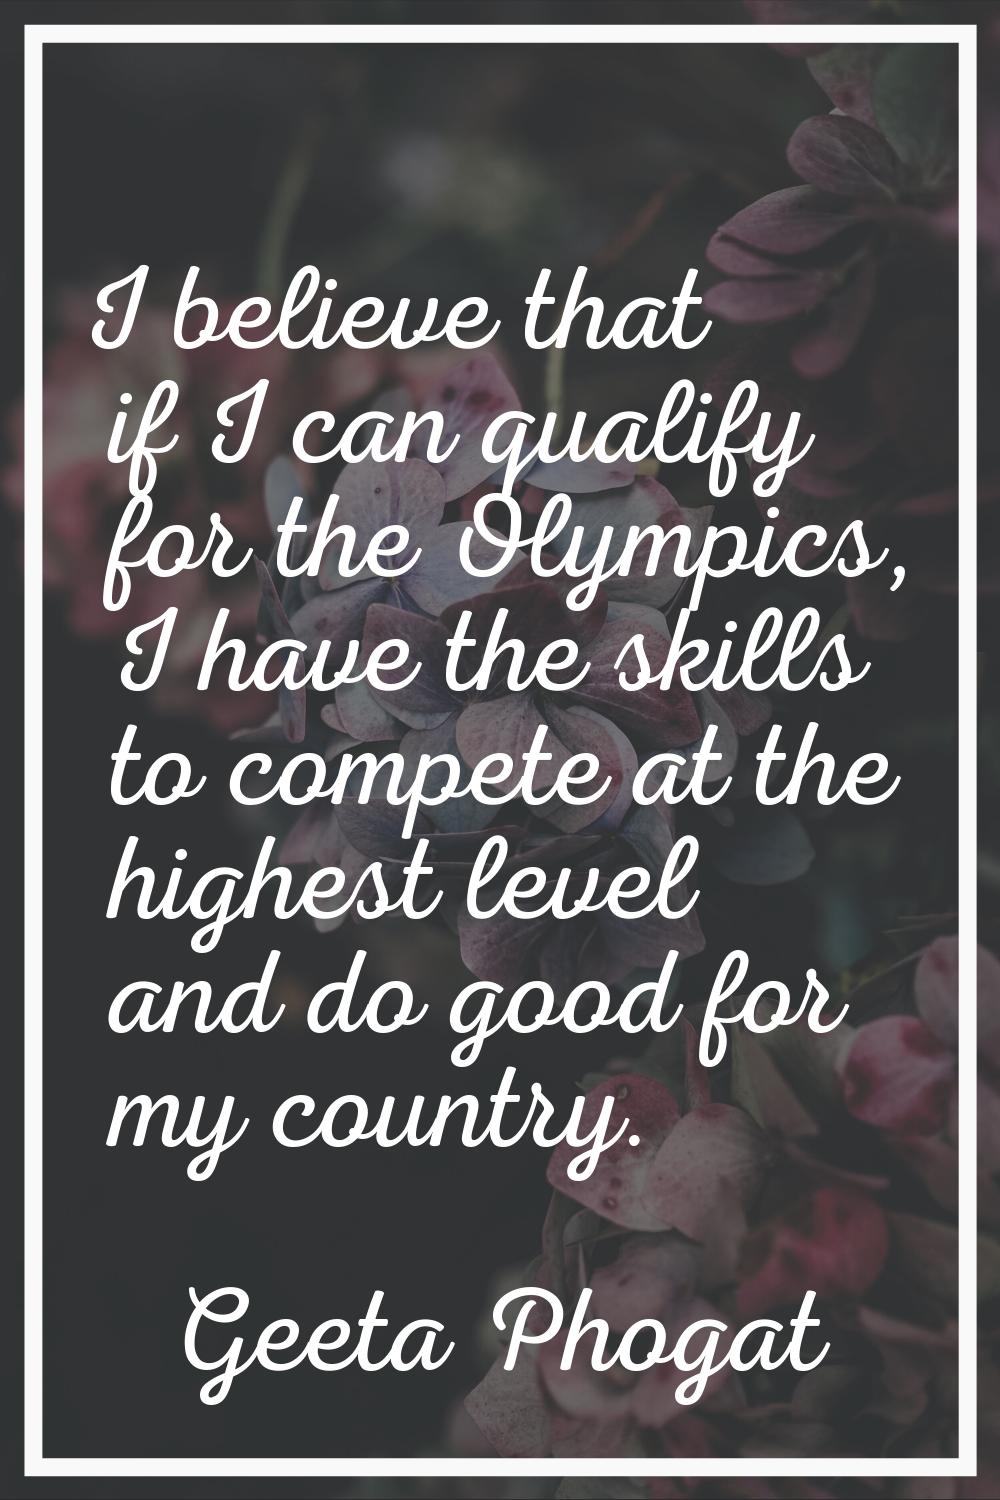 I believe that if I can qualify for the Olympics, I have the skills to compete at the highest level